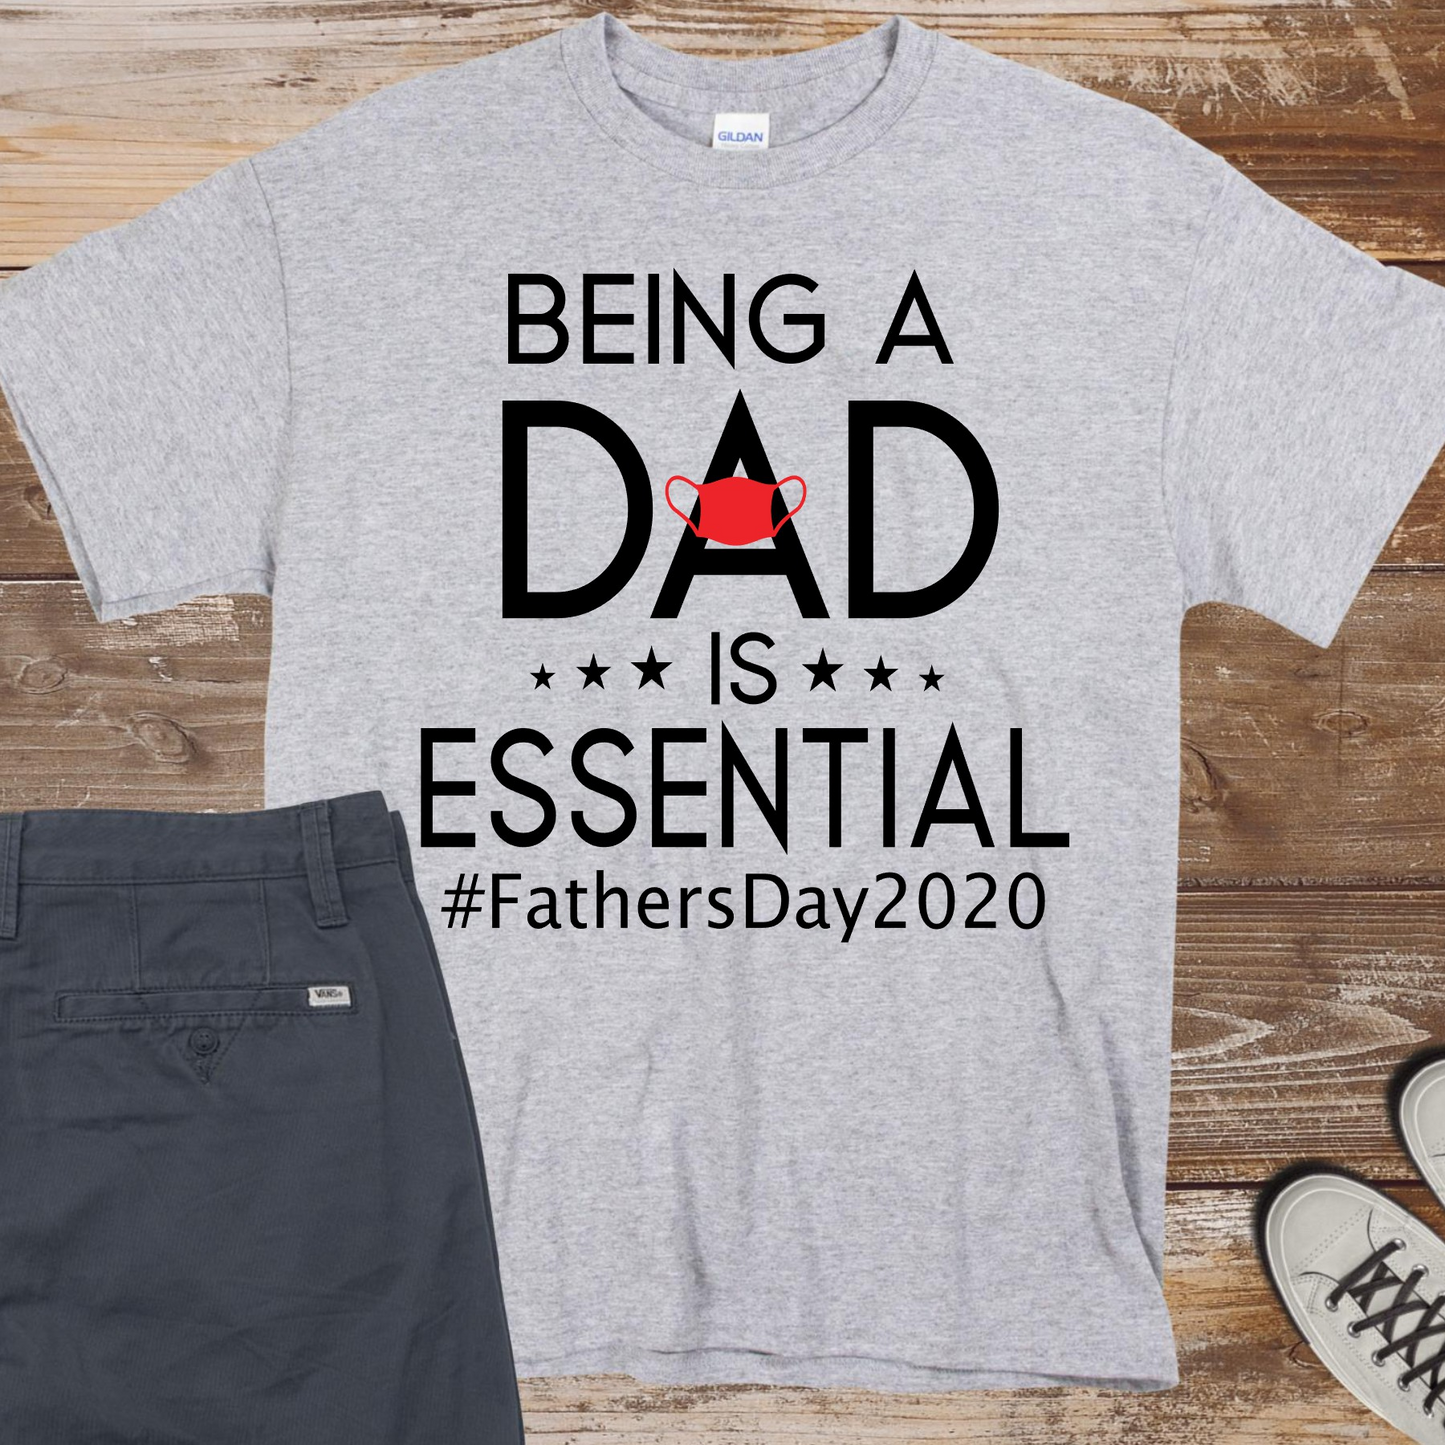 Being A Dad is Essential